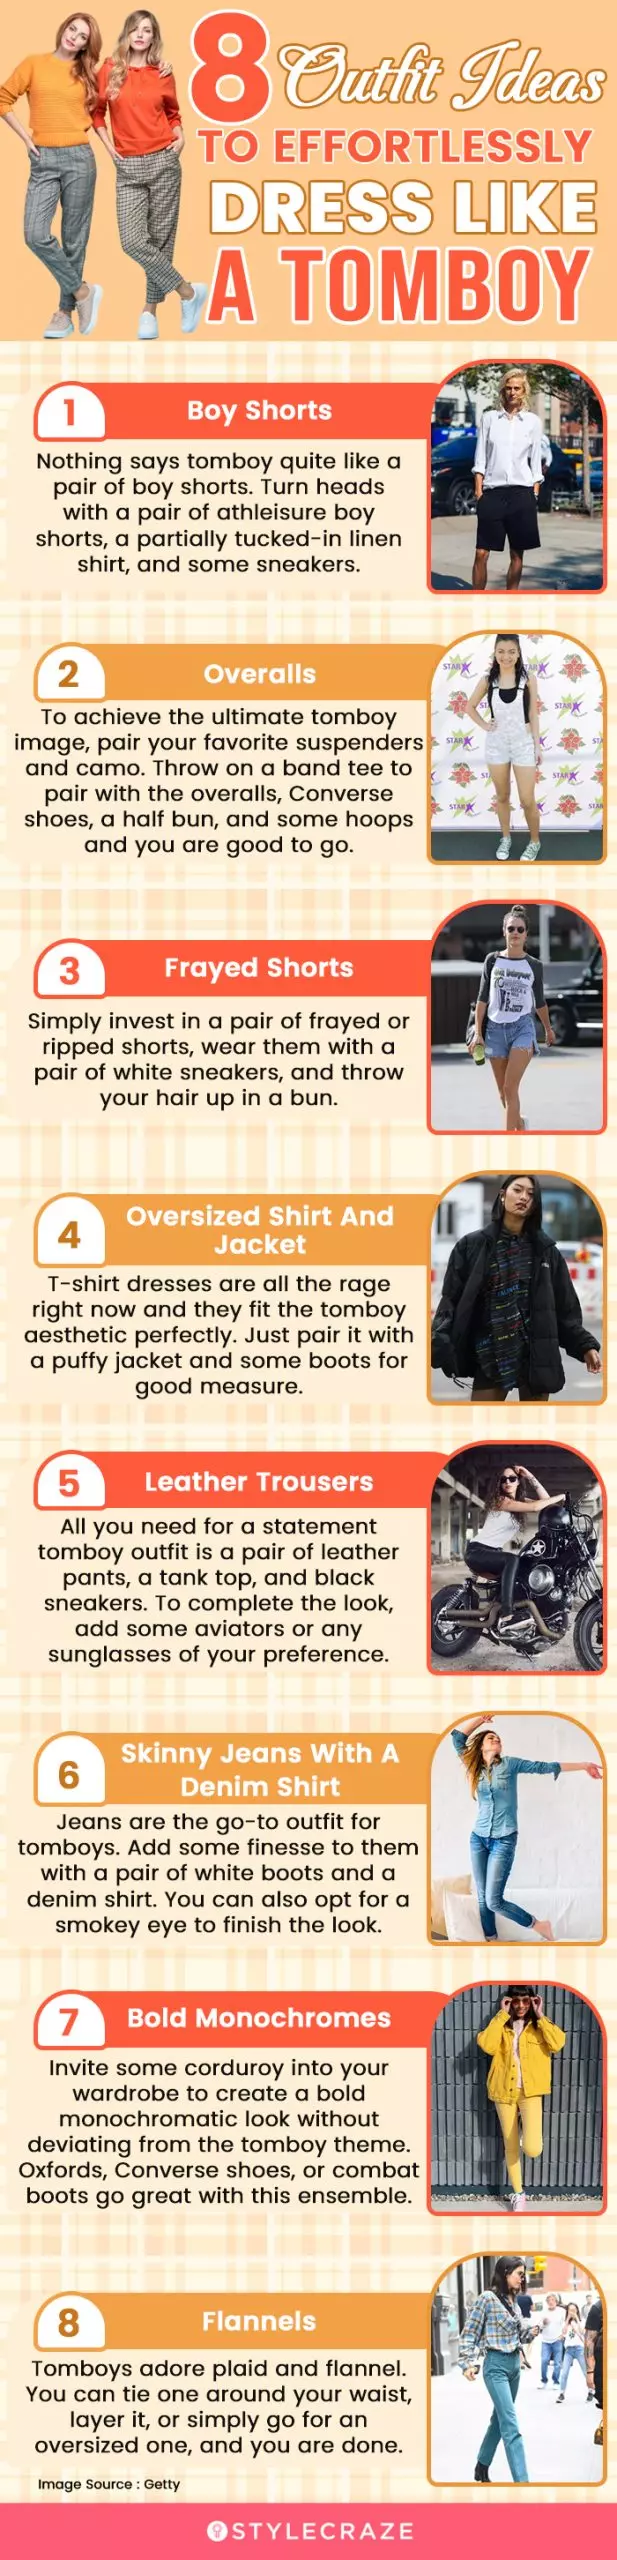 8 outfit ideas to effortlessly dress like a tomboy (infographic)